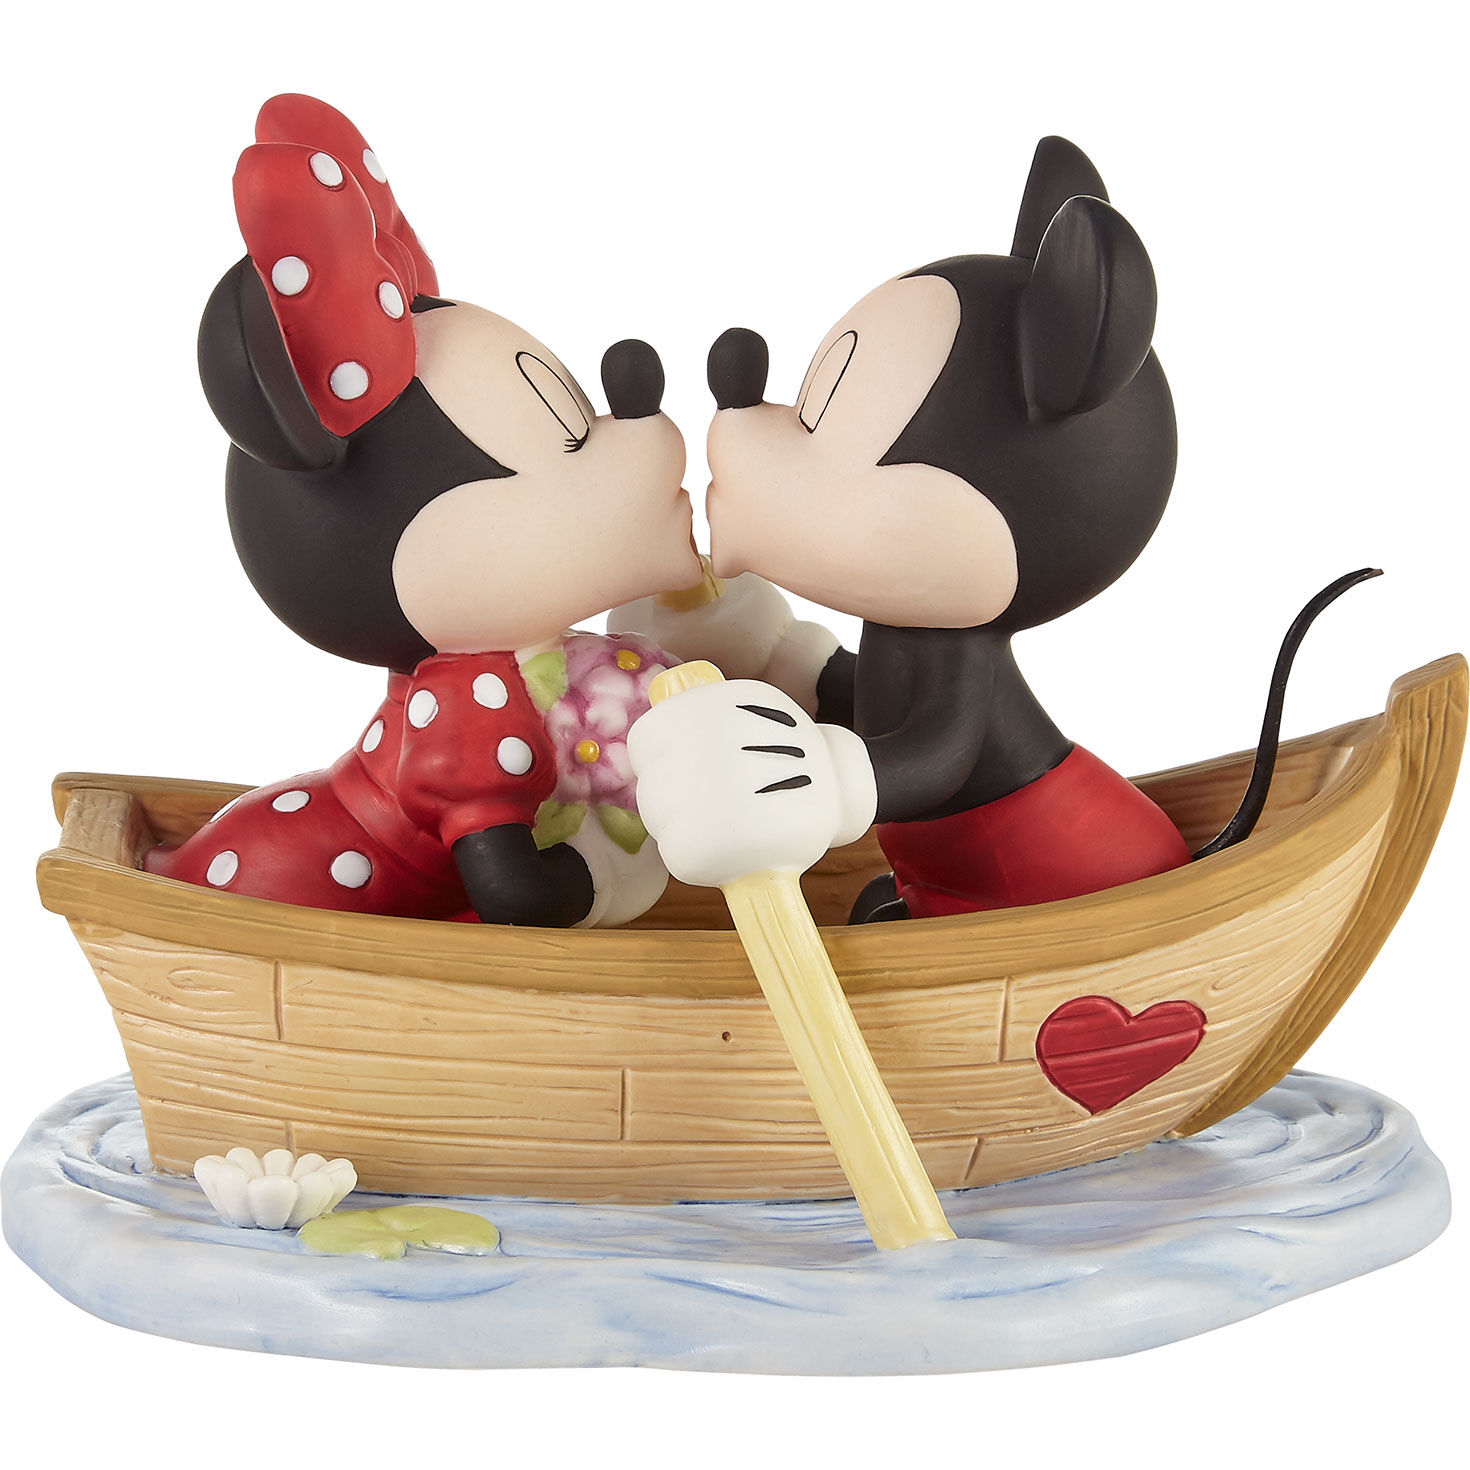 Precious Moments Disney Never Drift Apart Mickey and Minnie Mouse Figurine, 5" for only USD 95.99 | Hallmark